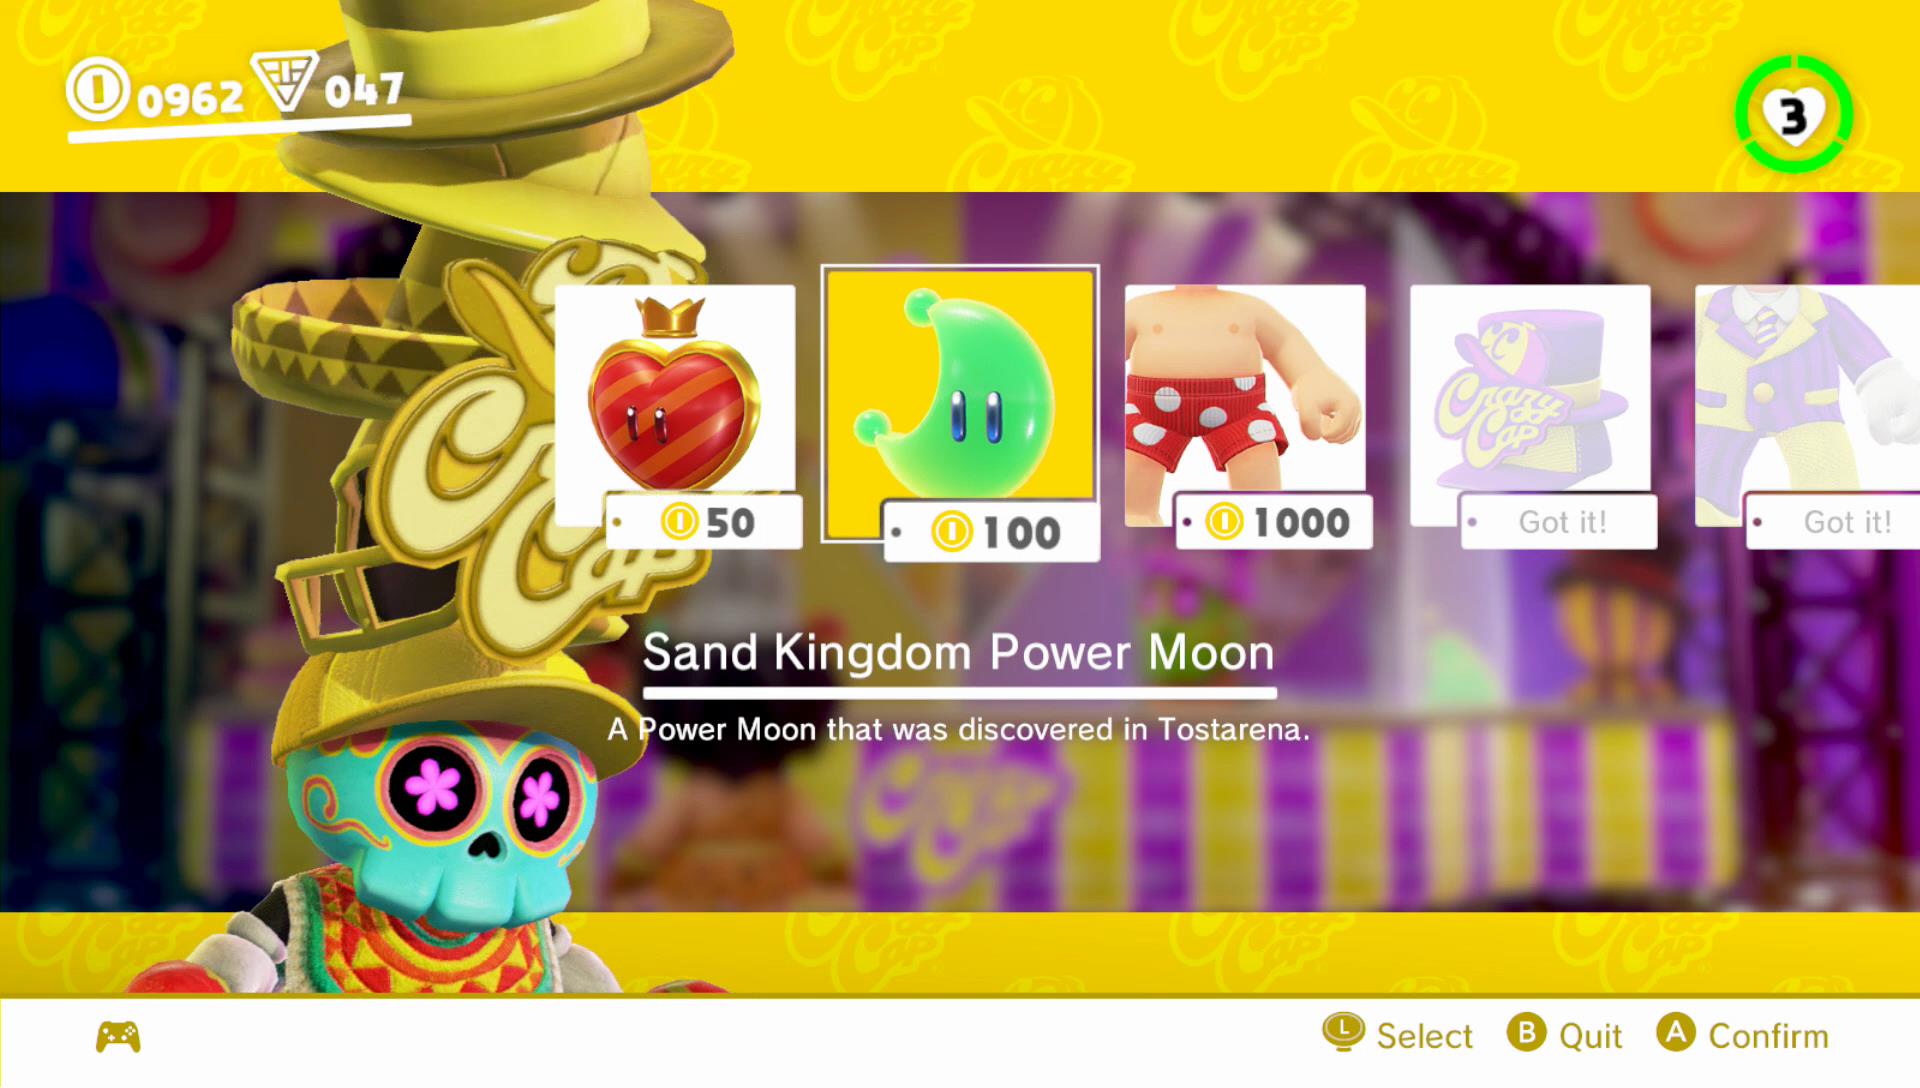 Sand Kingdom Power Moon 31 - Found in the Sand! Good Dog! - Super Mario  Odyssey Guide - IGN